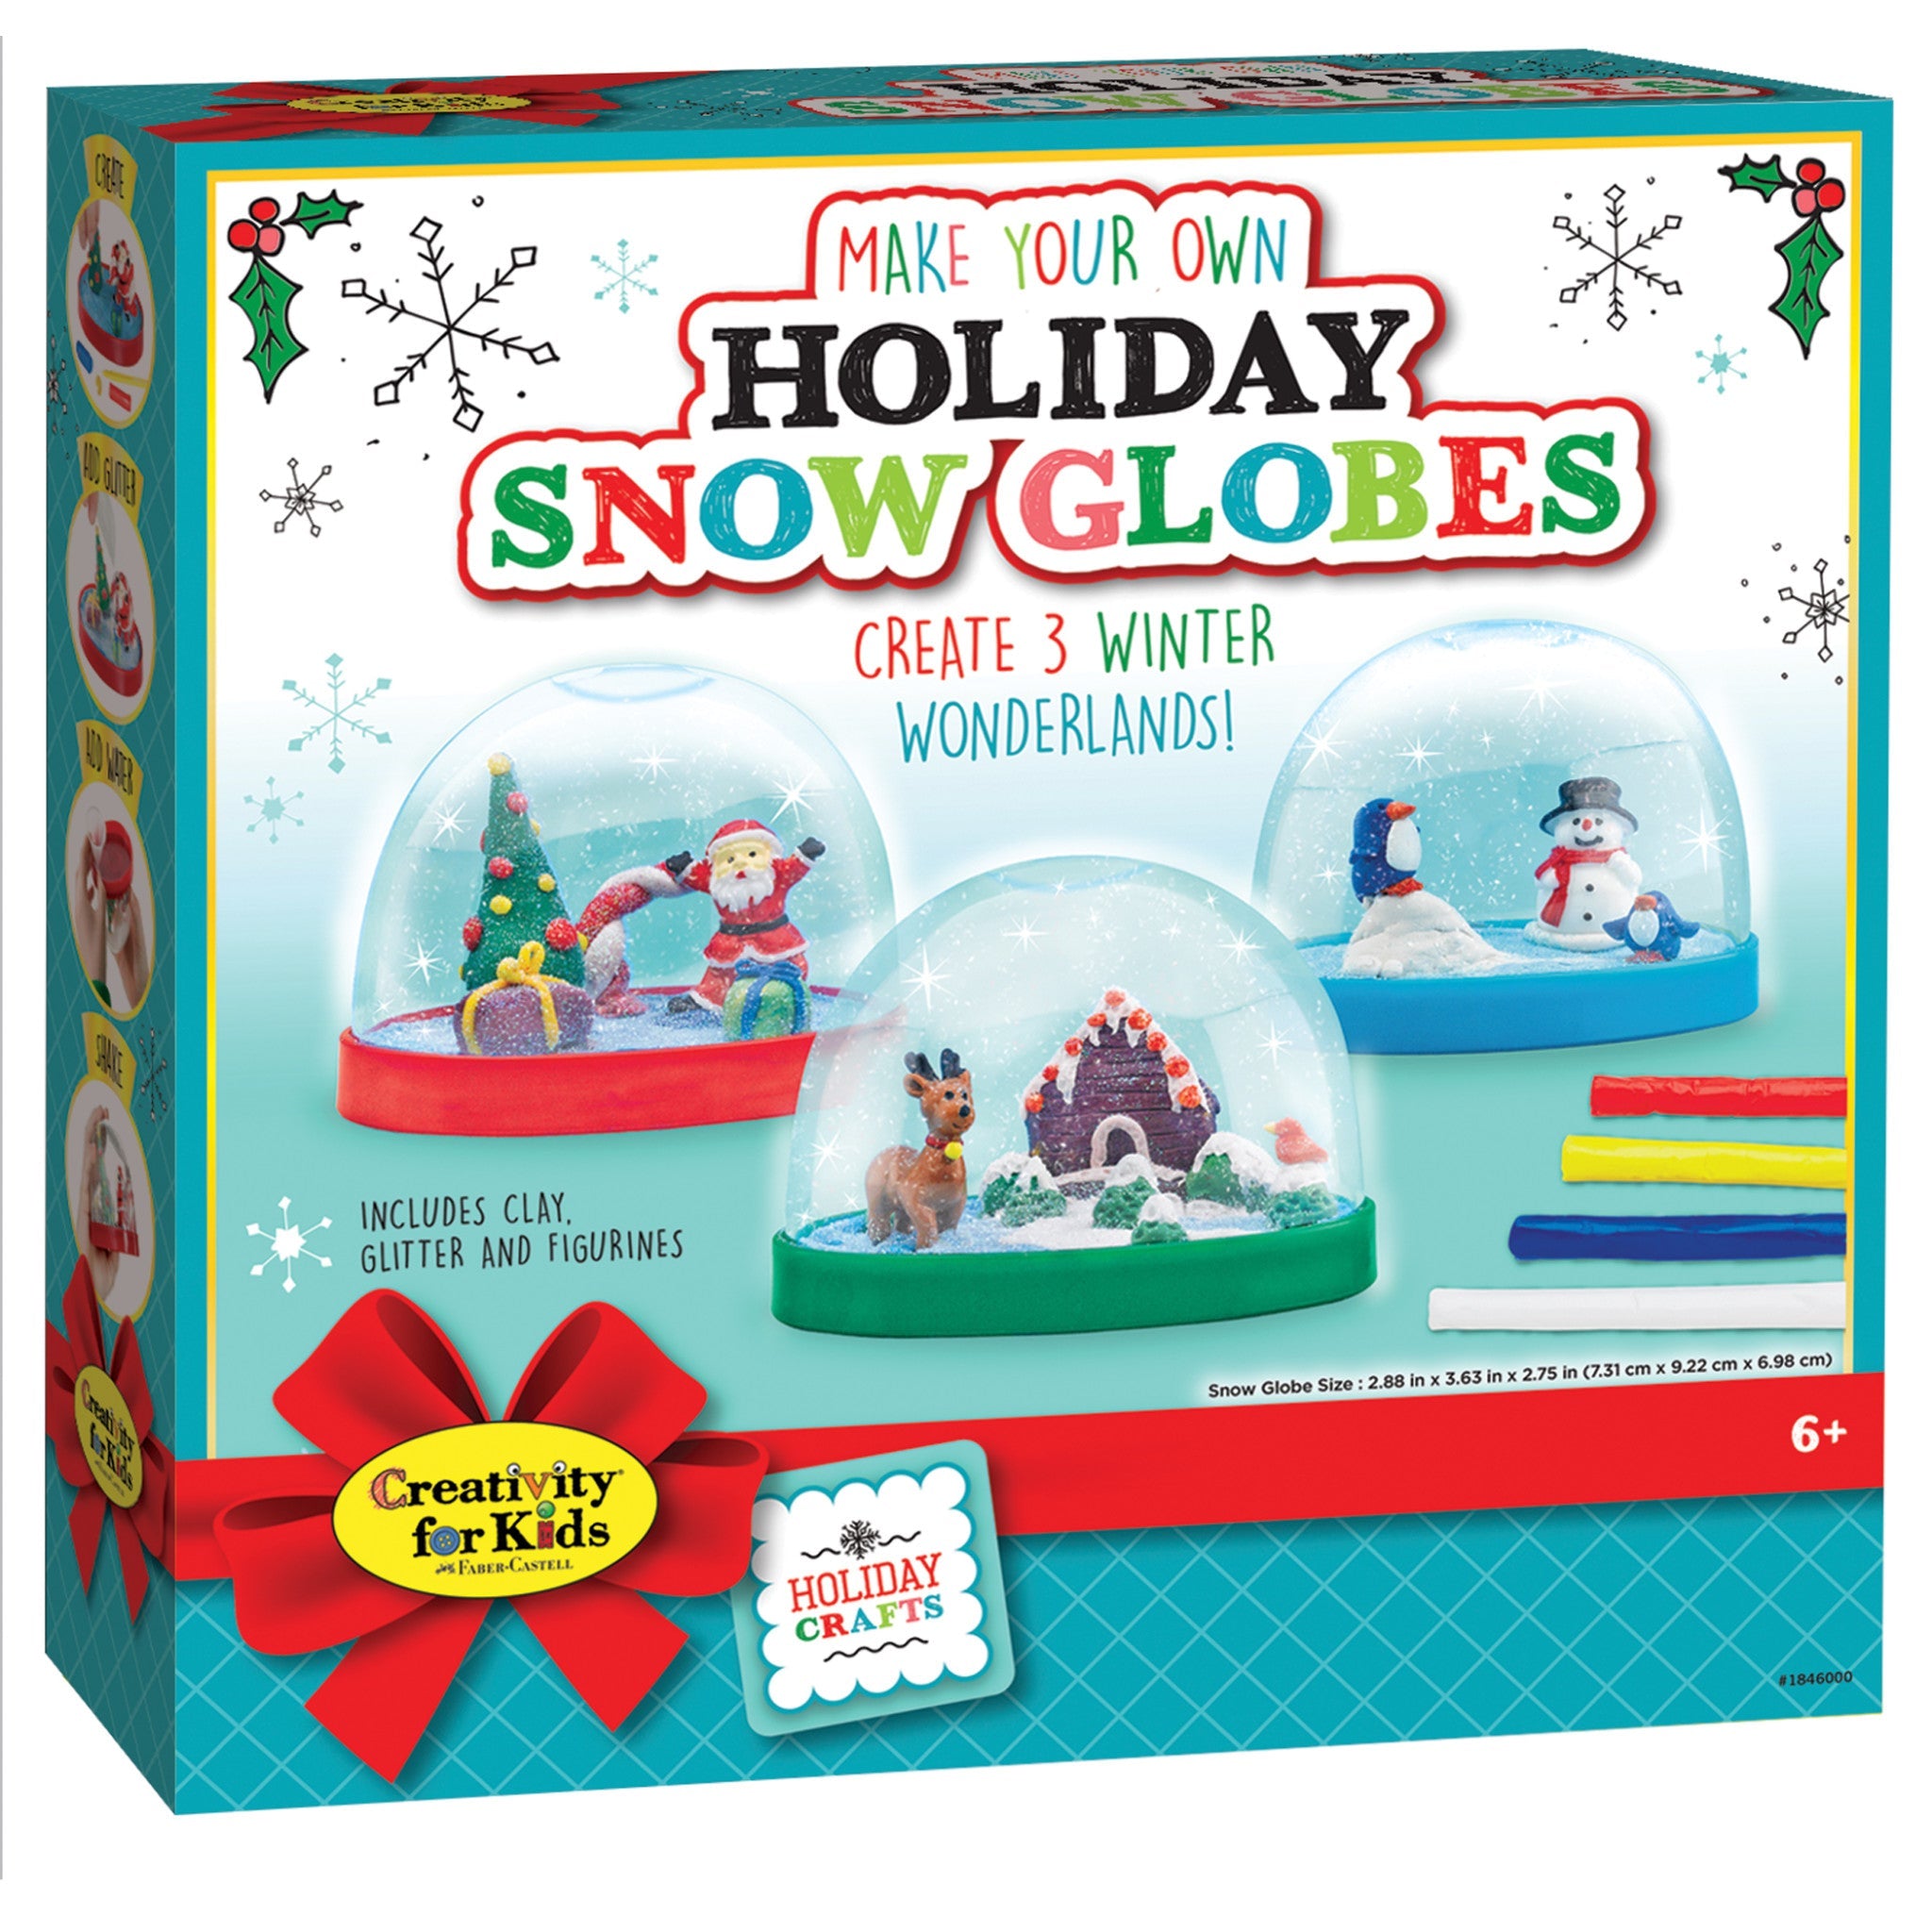 Make Your Own Holiday Snow Globes by Faber-Castell # 1846000